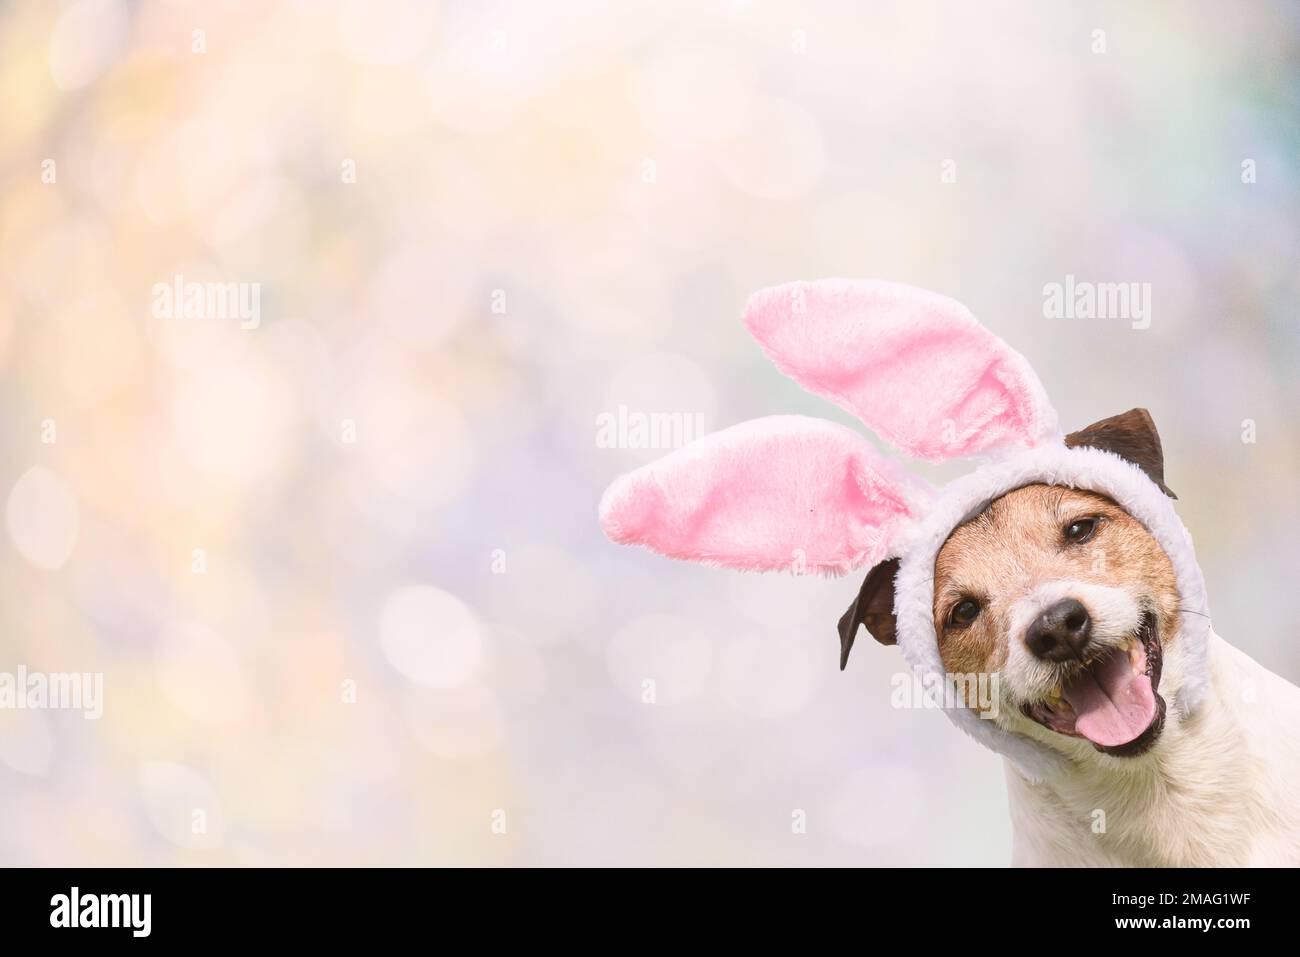 Bright Easter background with happy smiling dog wearing bunny ears costume Stock Photo